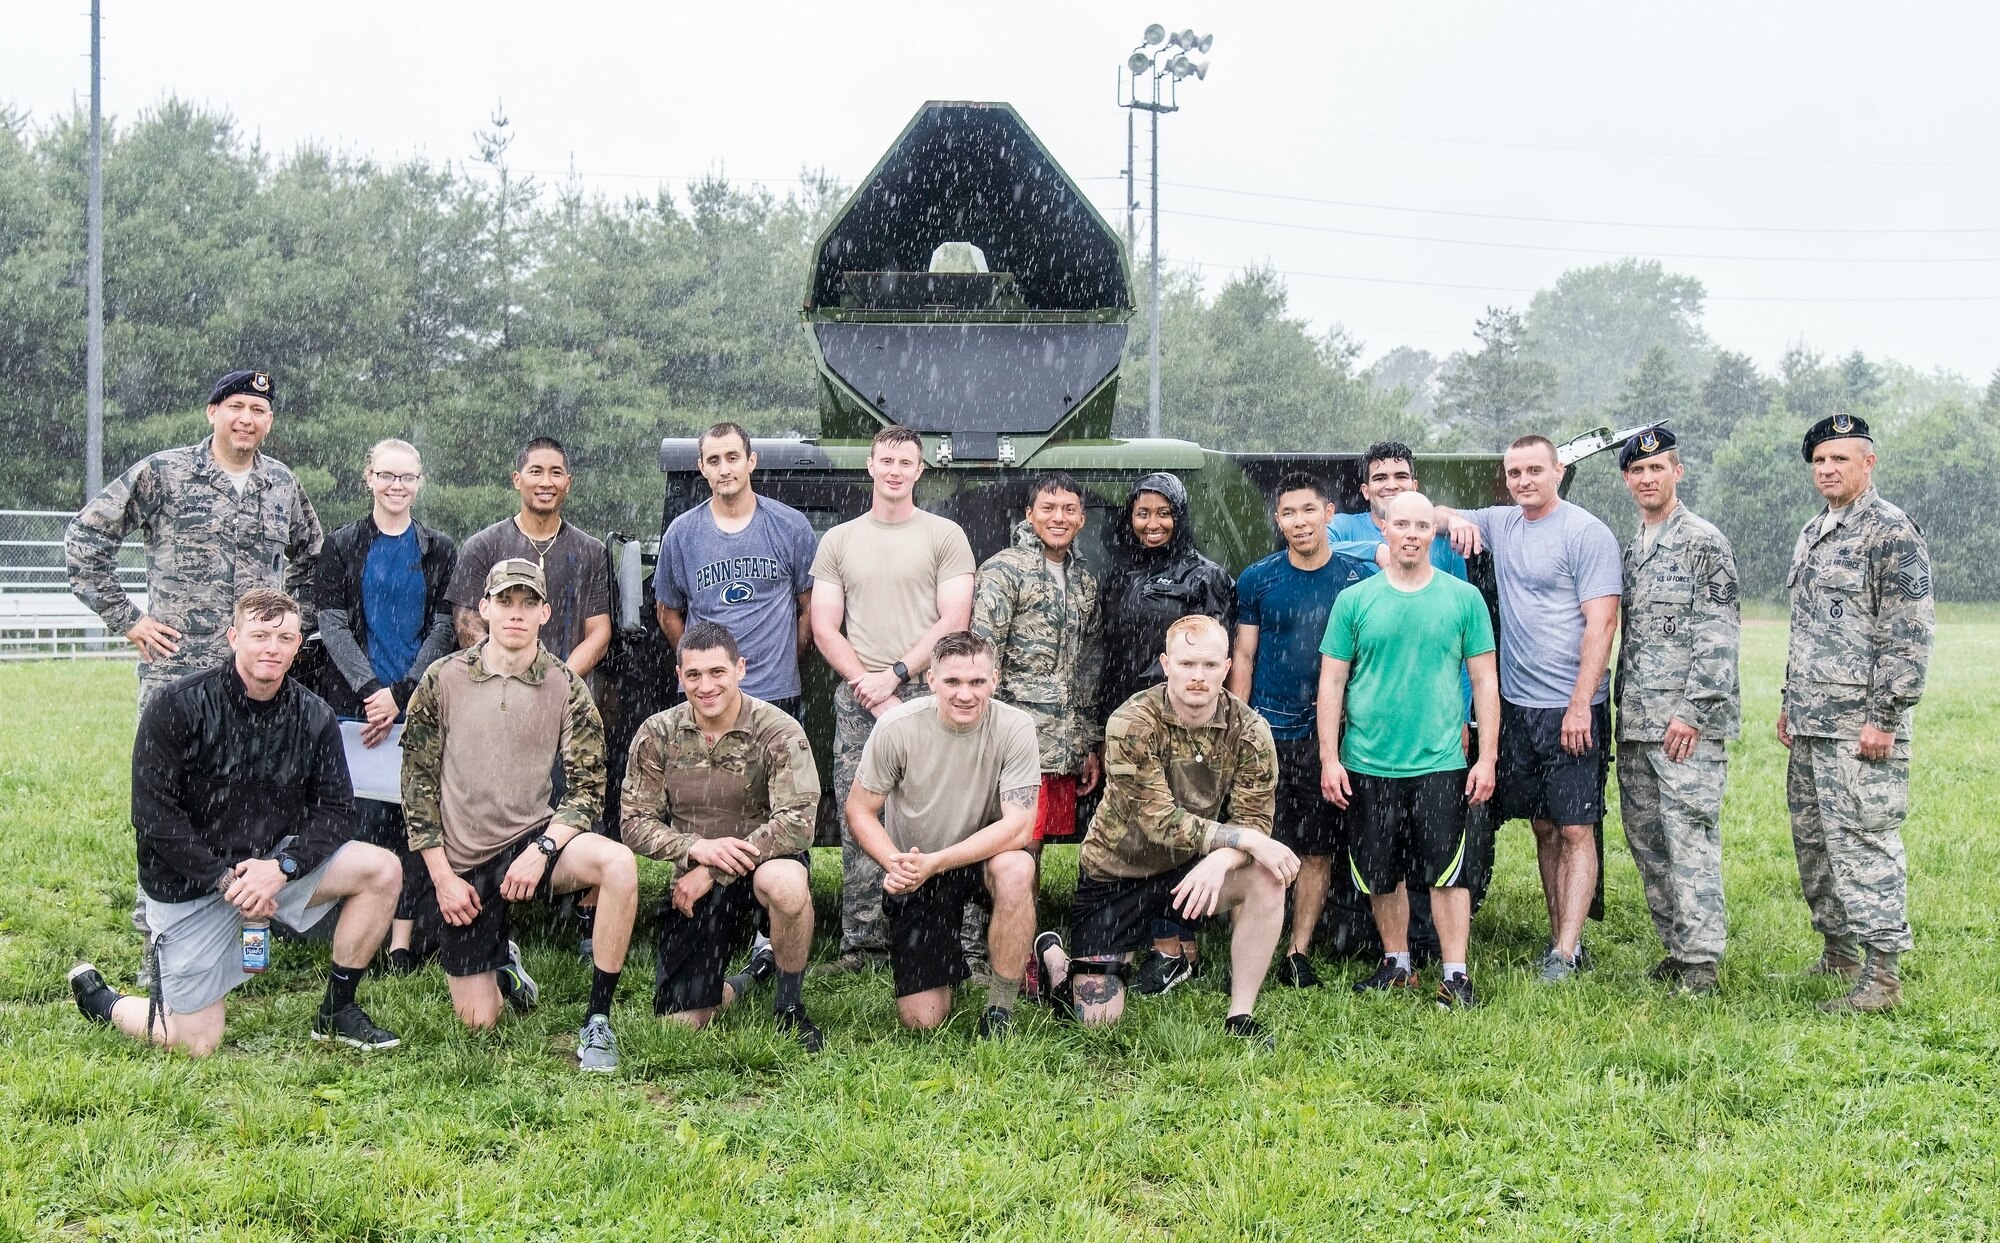 Lt. Col. Michael Morales (left) 436th Security Forces Squadron commander, and Police Week Combat Fitness Challenge participants pose for a photo in the rain after completing the team competition May 17, 2018, at Dover Air Force Base, Del. Morales awarded trophies to the first, second and third place teams. The first place team logged a 9-challenge cumulative time of 5 minutes and 13 seconds. (U.S. Air Force photo by Roland Balik)